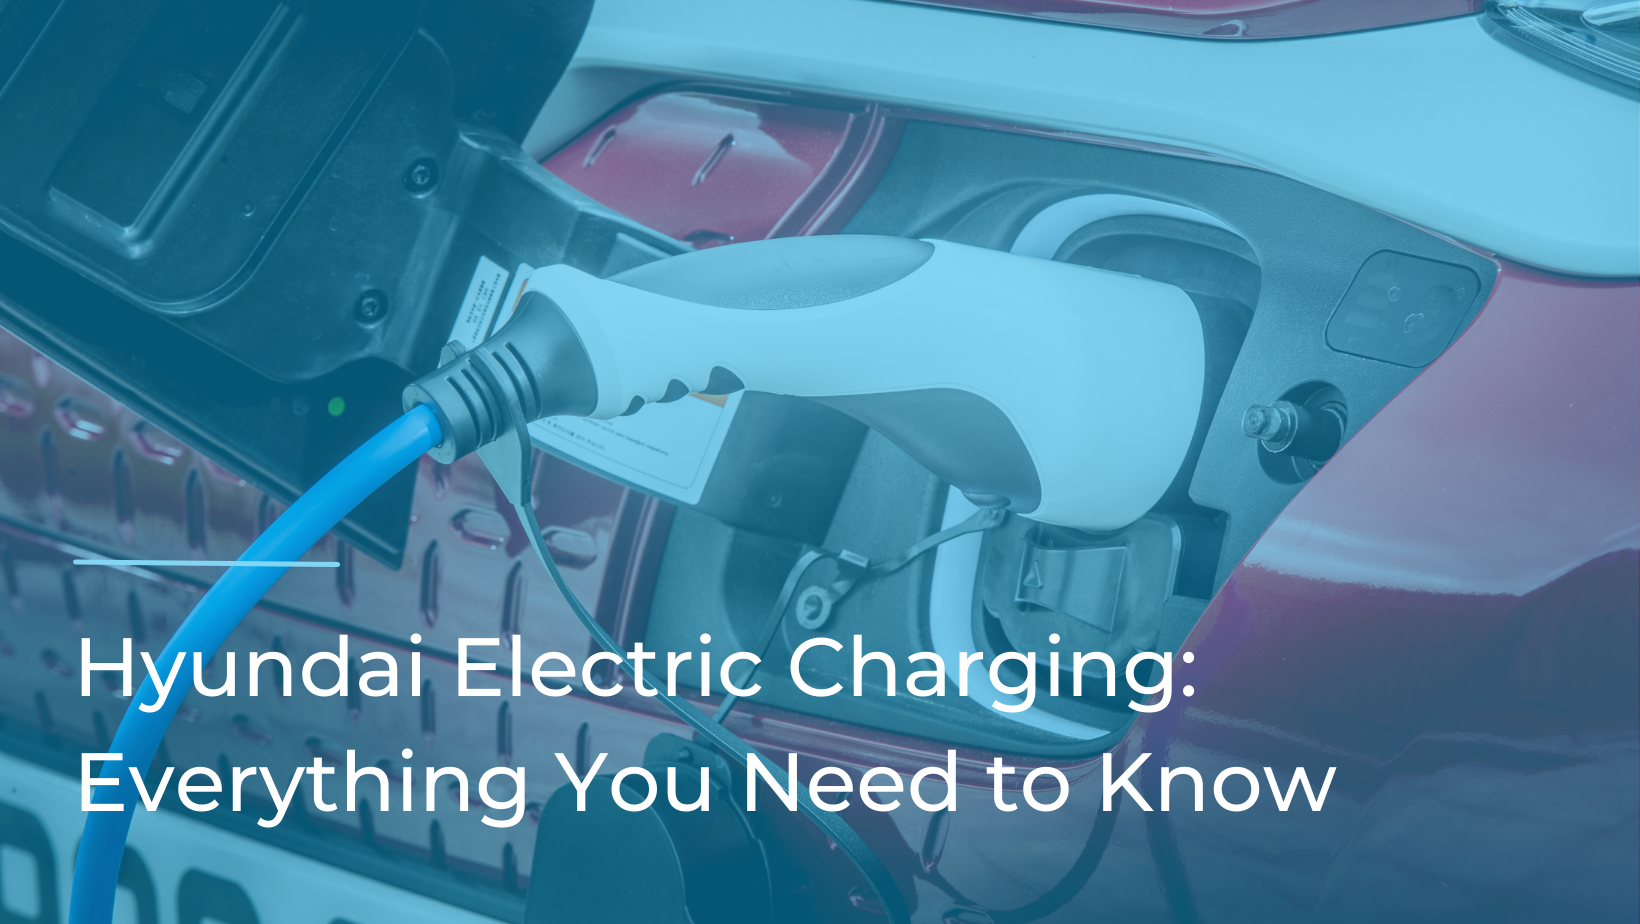 Hyundai - Electric Charging: Everything You Need to Know